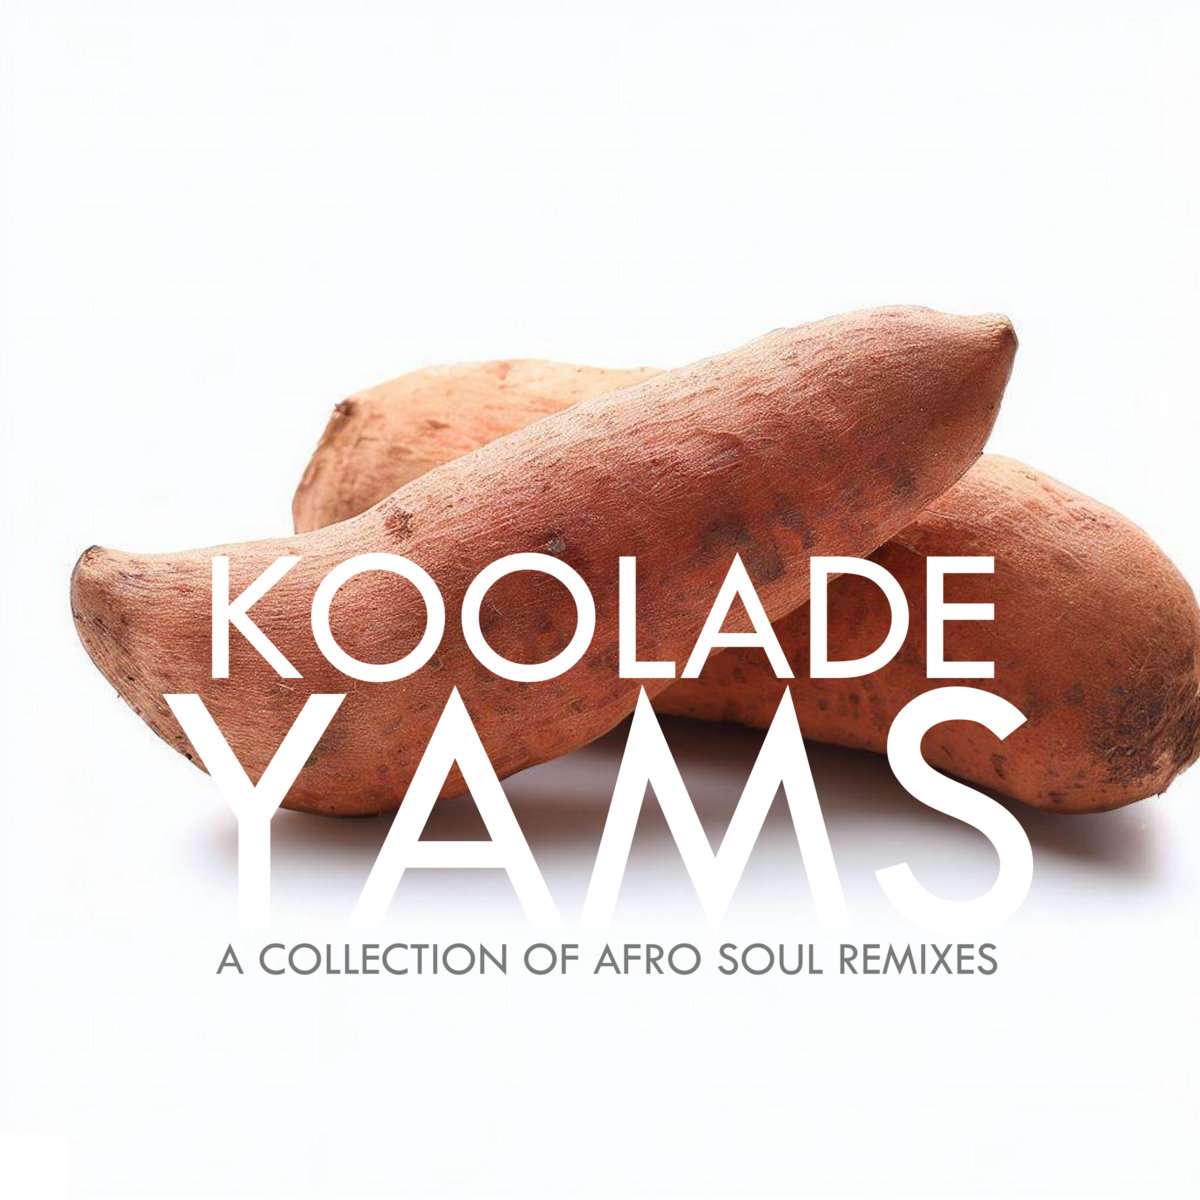 Koolade – Yams (A Collection Of Afro Soul Remixes)